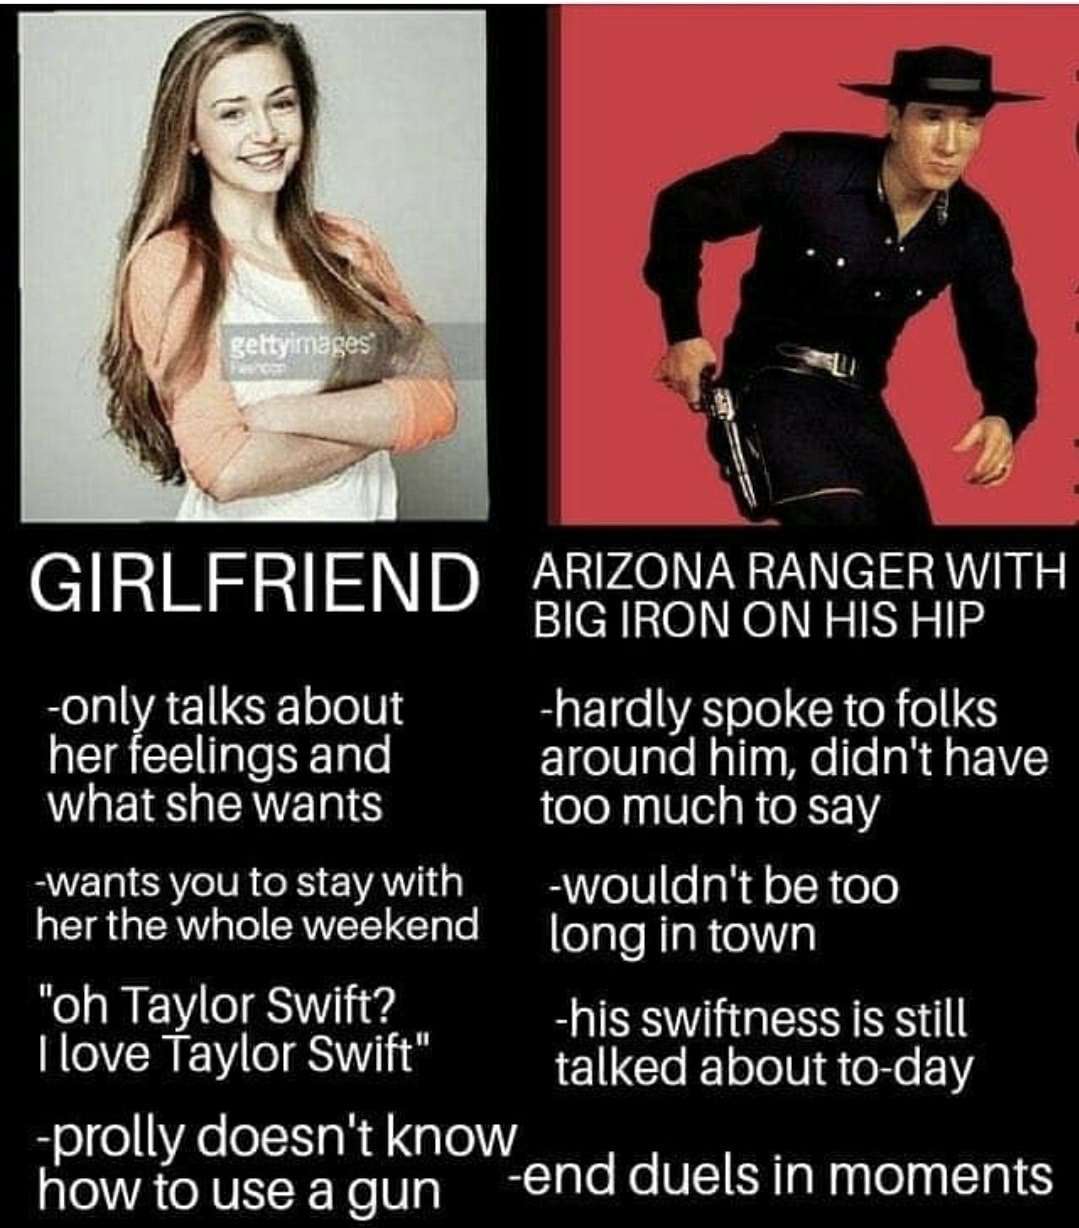 big iron memes - gettyimages Arizona Ranger With Big Iron On His Hip only talks about hardly spoke to folks her feelings and around him, didn't have what she wants too much to say wants you to stay with wouldn't be too her the whole weekend long in town "